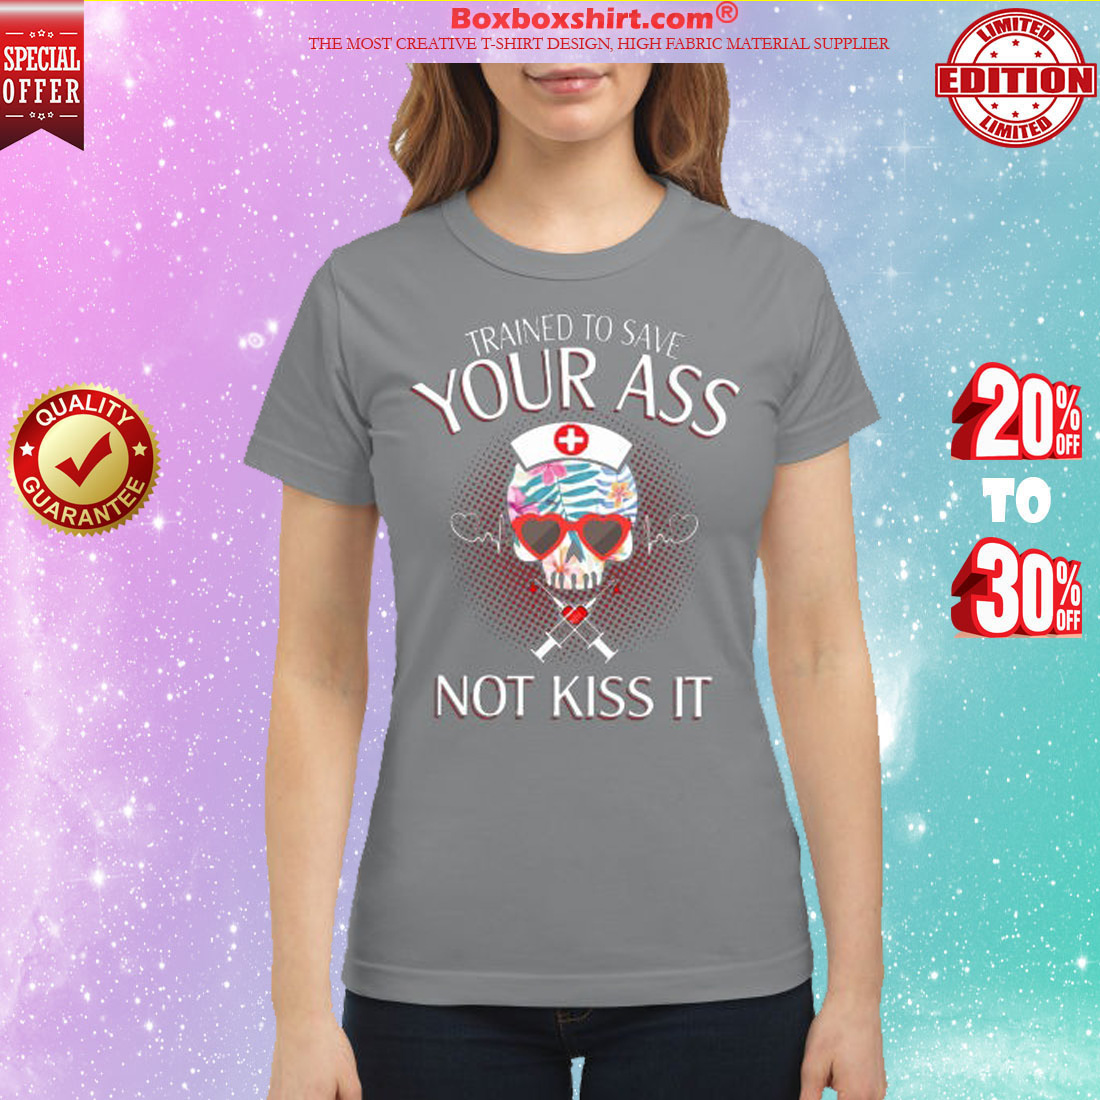 Nurse trained to save your ass not kiss it classic shirt